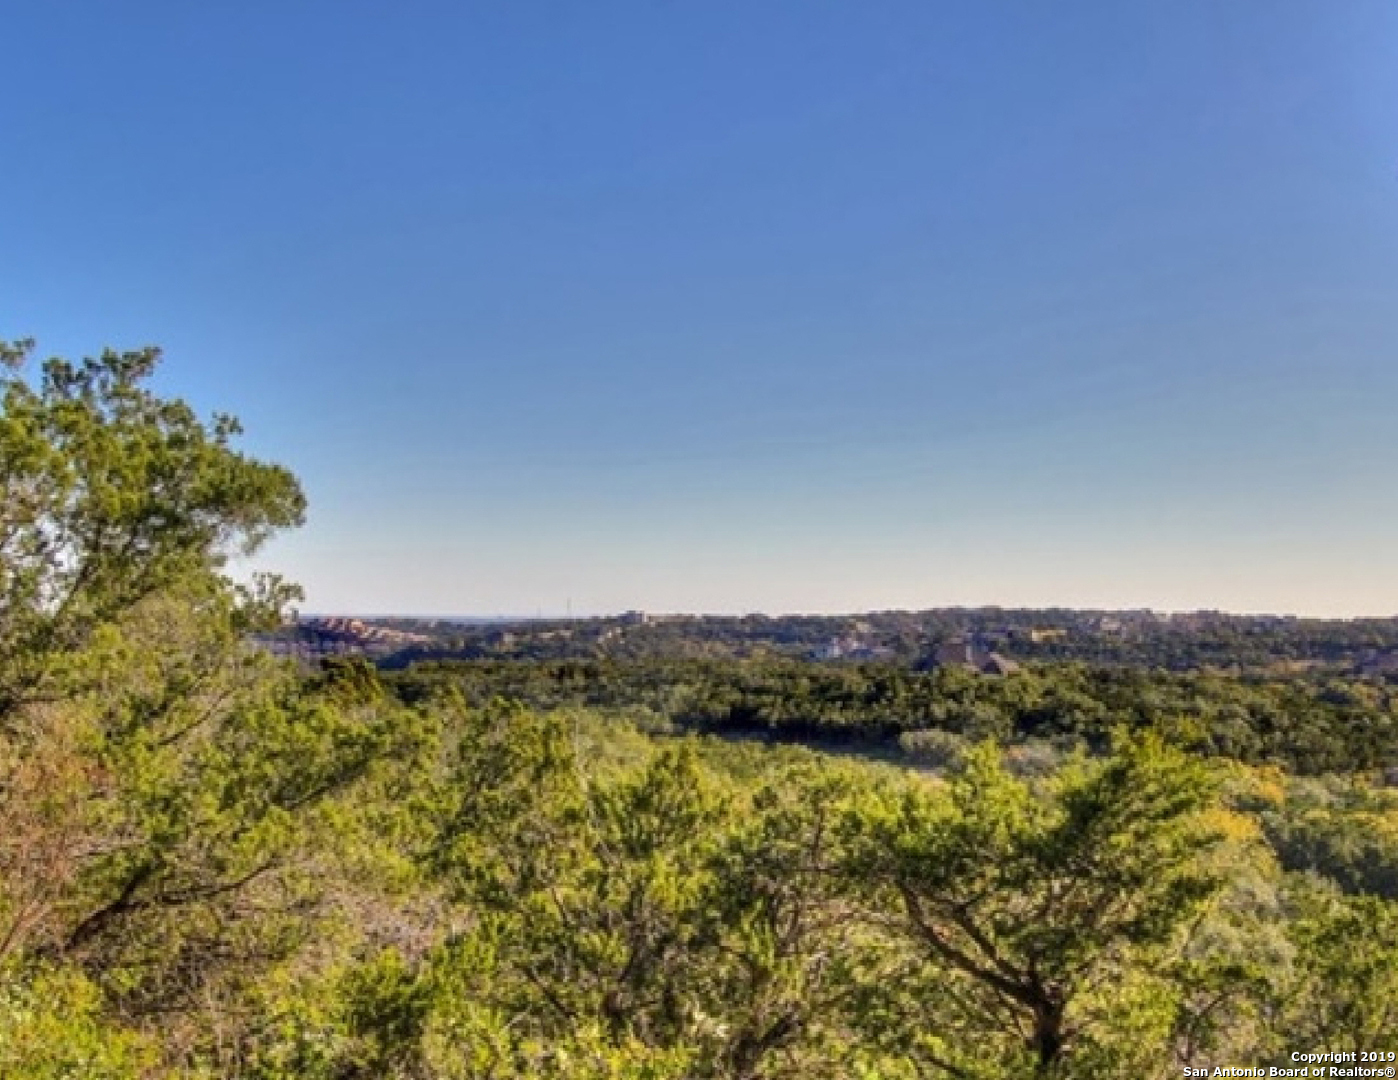 Awesome Views! Prefect location to build your dream home! Gorgeous hilltop views of San Antonio, mature trees, wildlife and breathtaking sunrises and sunsets!  More than 200 ft of frontage along Cielo Vista Dr.  This beautiful property is located between IH 10 and Babcock, just a short drive to La Cantera, The Rim, UTSA, Valero Energy, Leon Springs, Scenic Loop.  Very Special Property for the Discrete Owner! Must See!